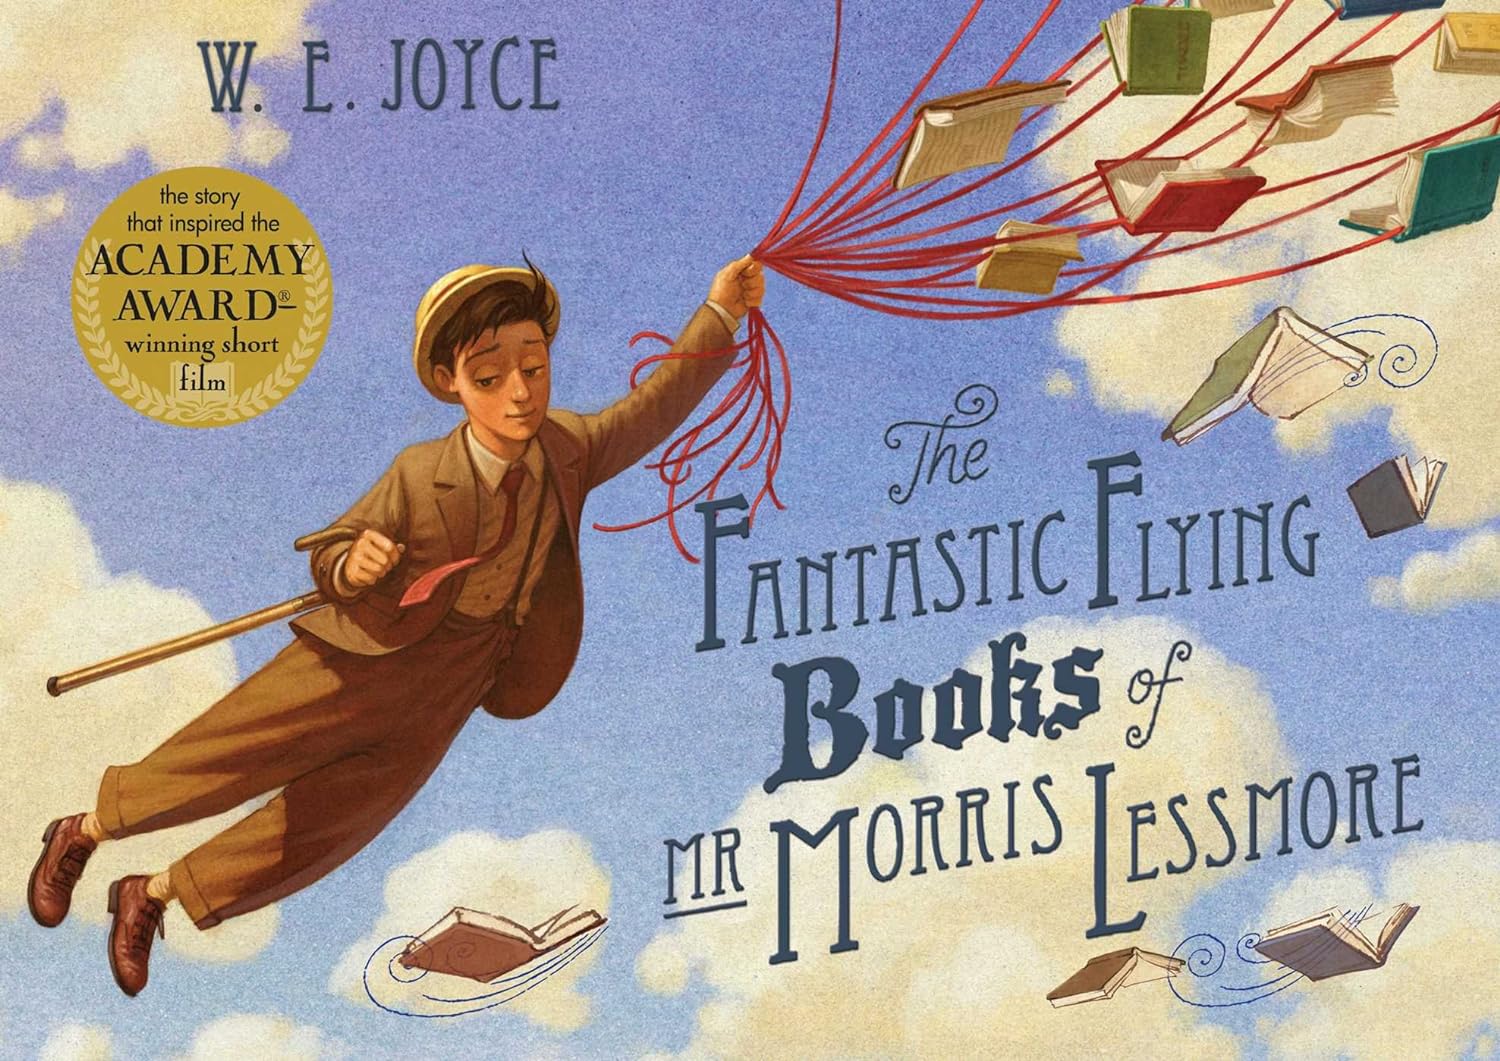 Book cover of The Fantastic Flying Books of MR Morris Lessmore. A boy, dressed in a suit and tie with a hat and cane, flying through the sky holding onto a cluster of red strings attached to flying books. 